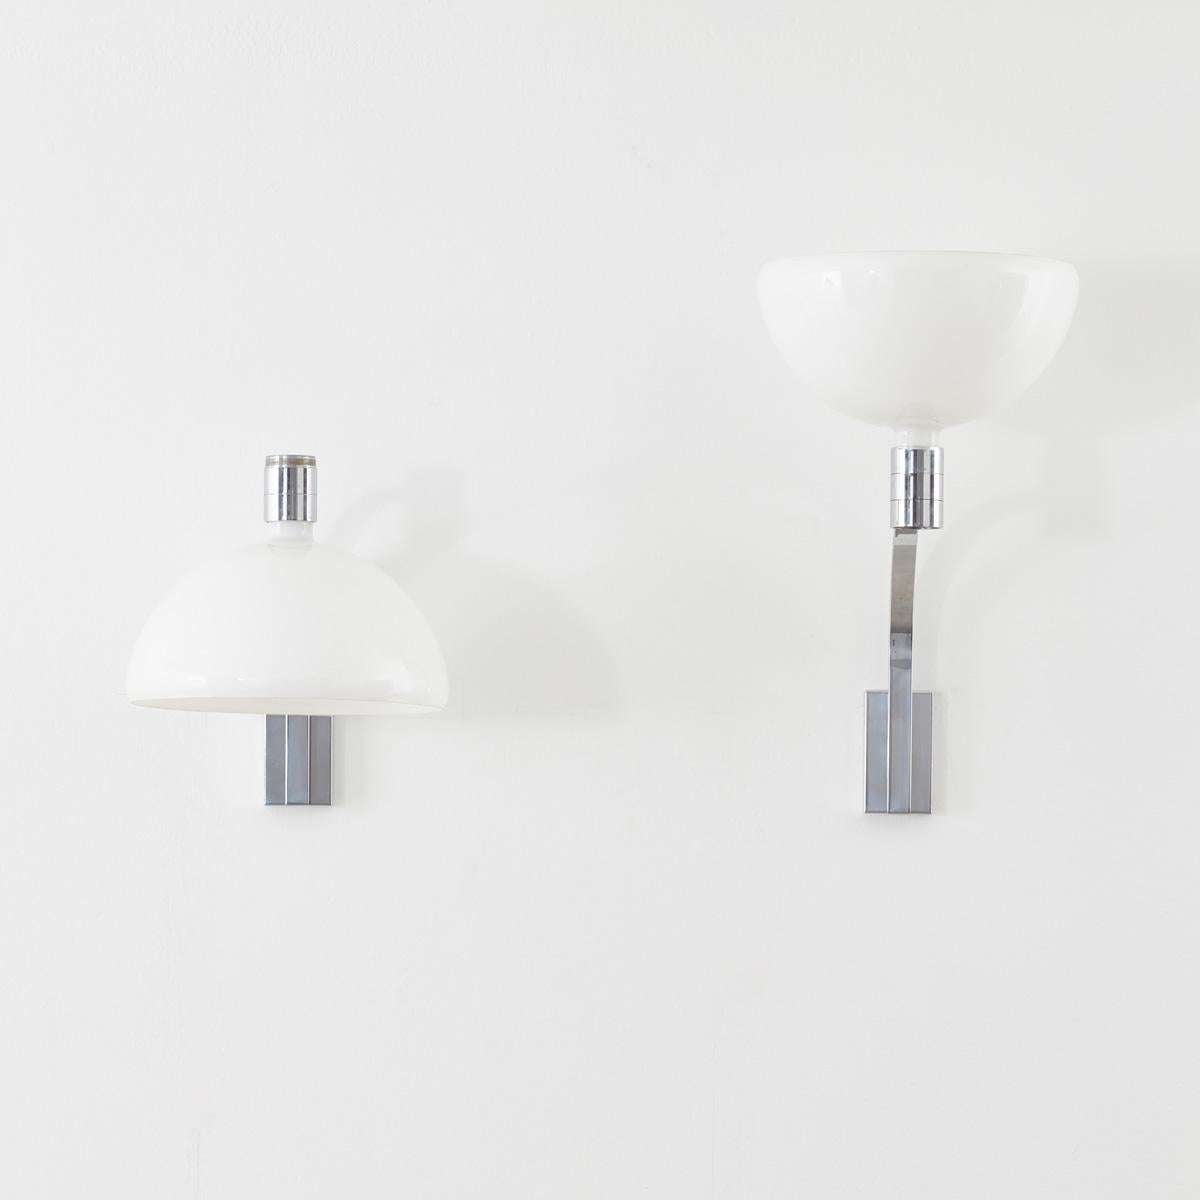 Mid-Century Modern AM/AS wall lights by Albini, Helg and Piva for Sirrah, Italy, c1960 For Sale